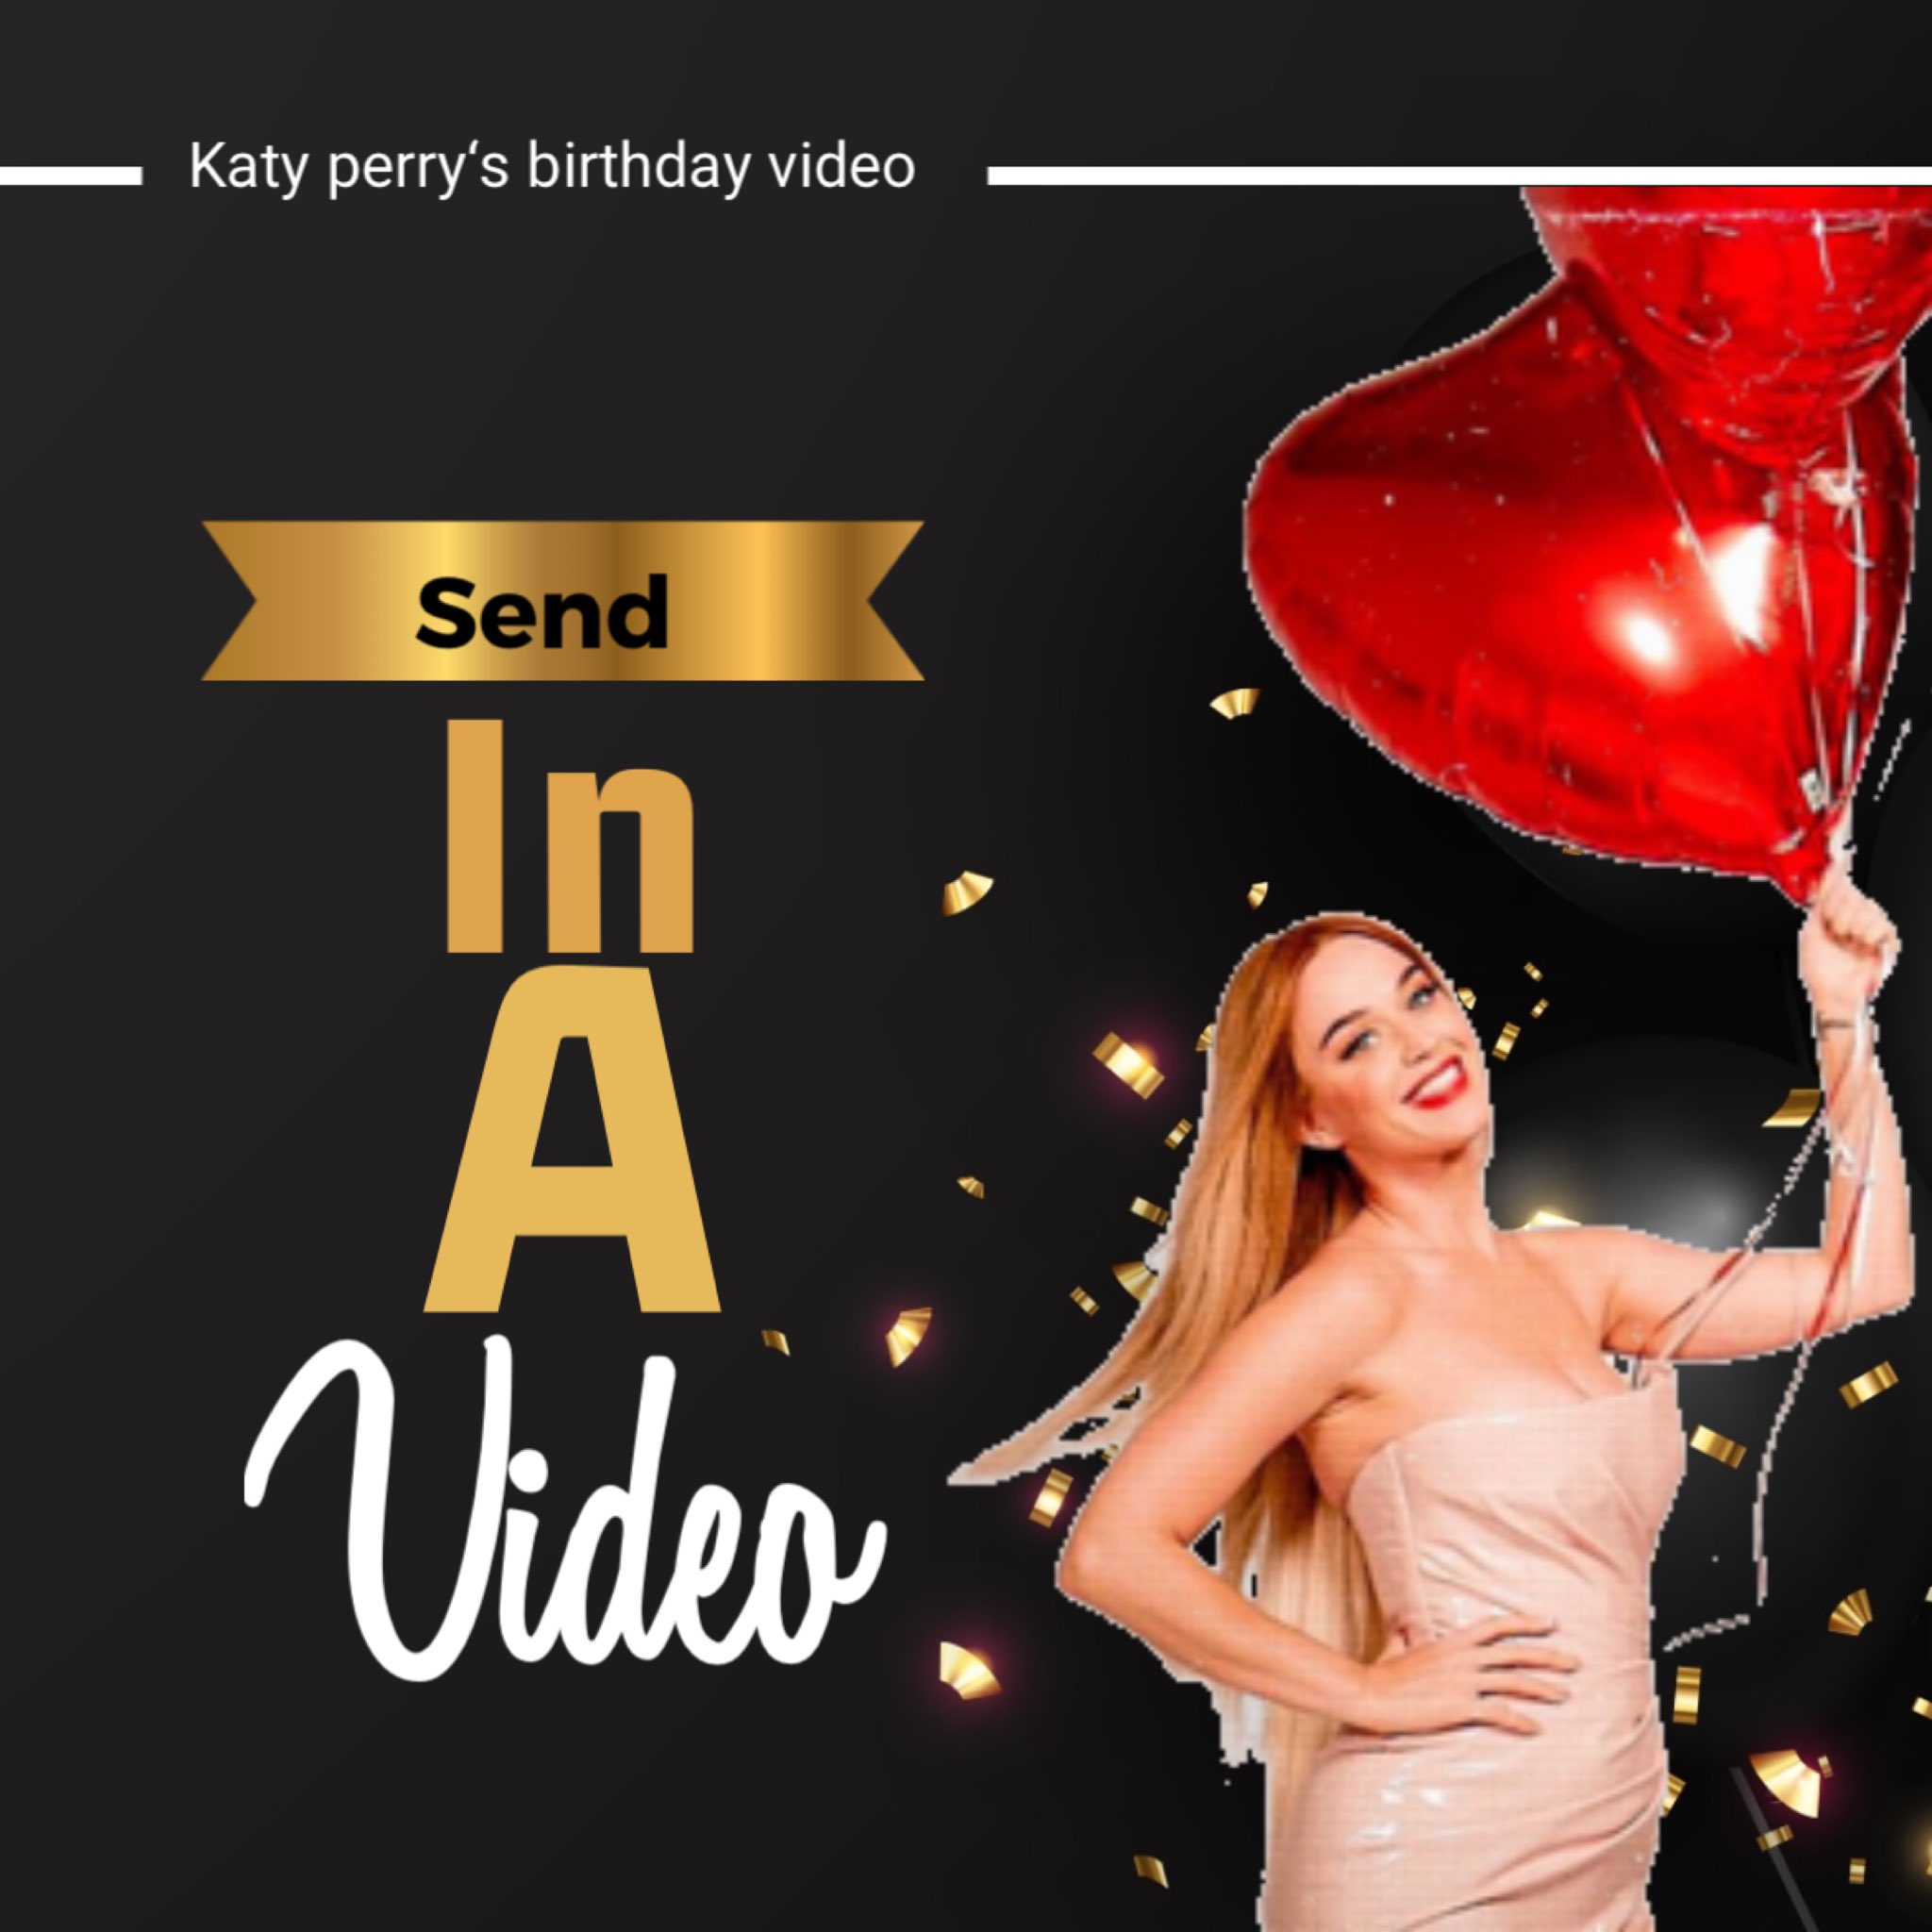 Send Us in a video of you wish katy Perry a happy birthday to be added to the video!!!! Closes tomorrow at 1pm est 